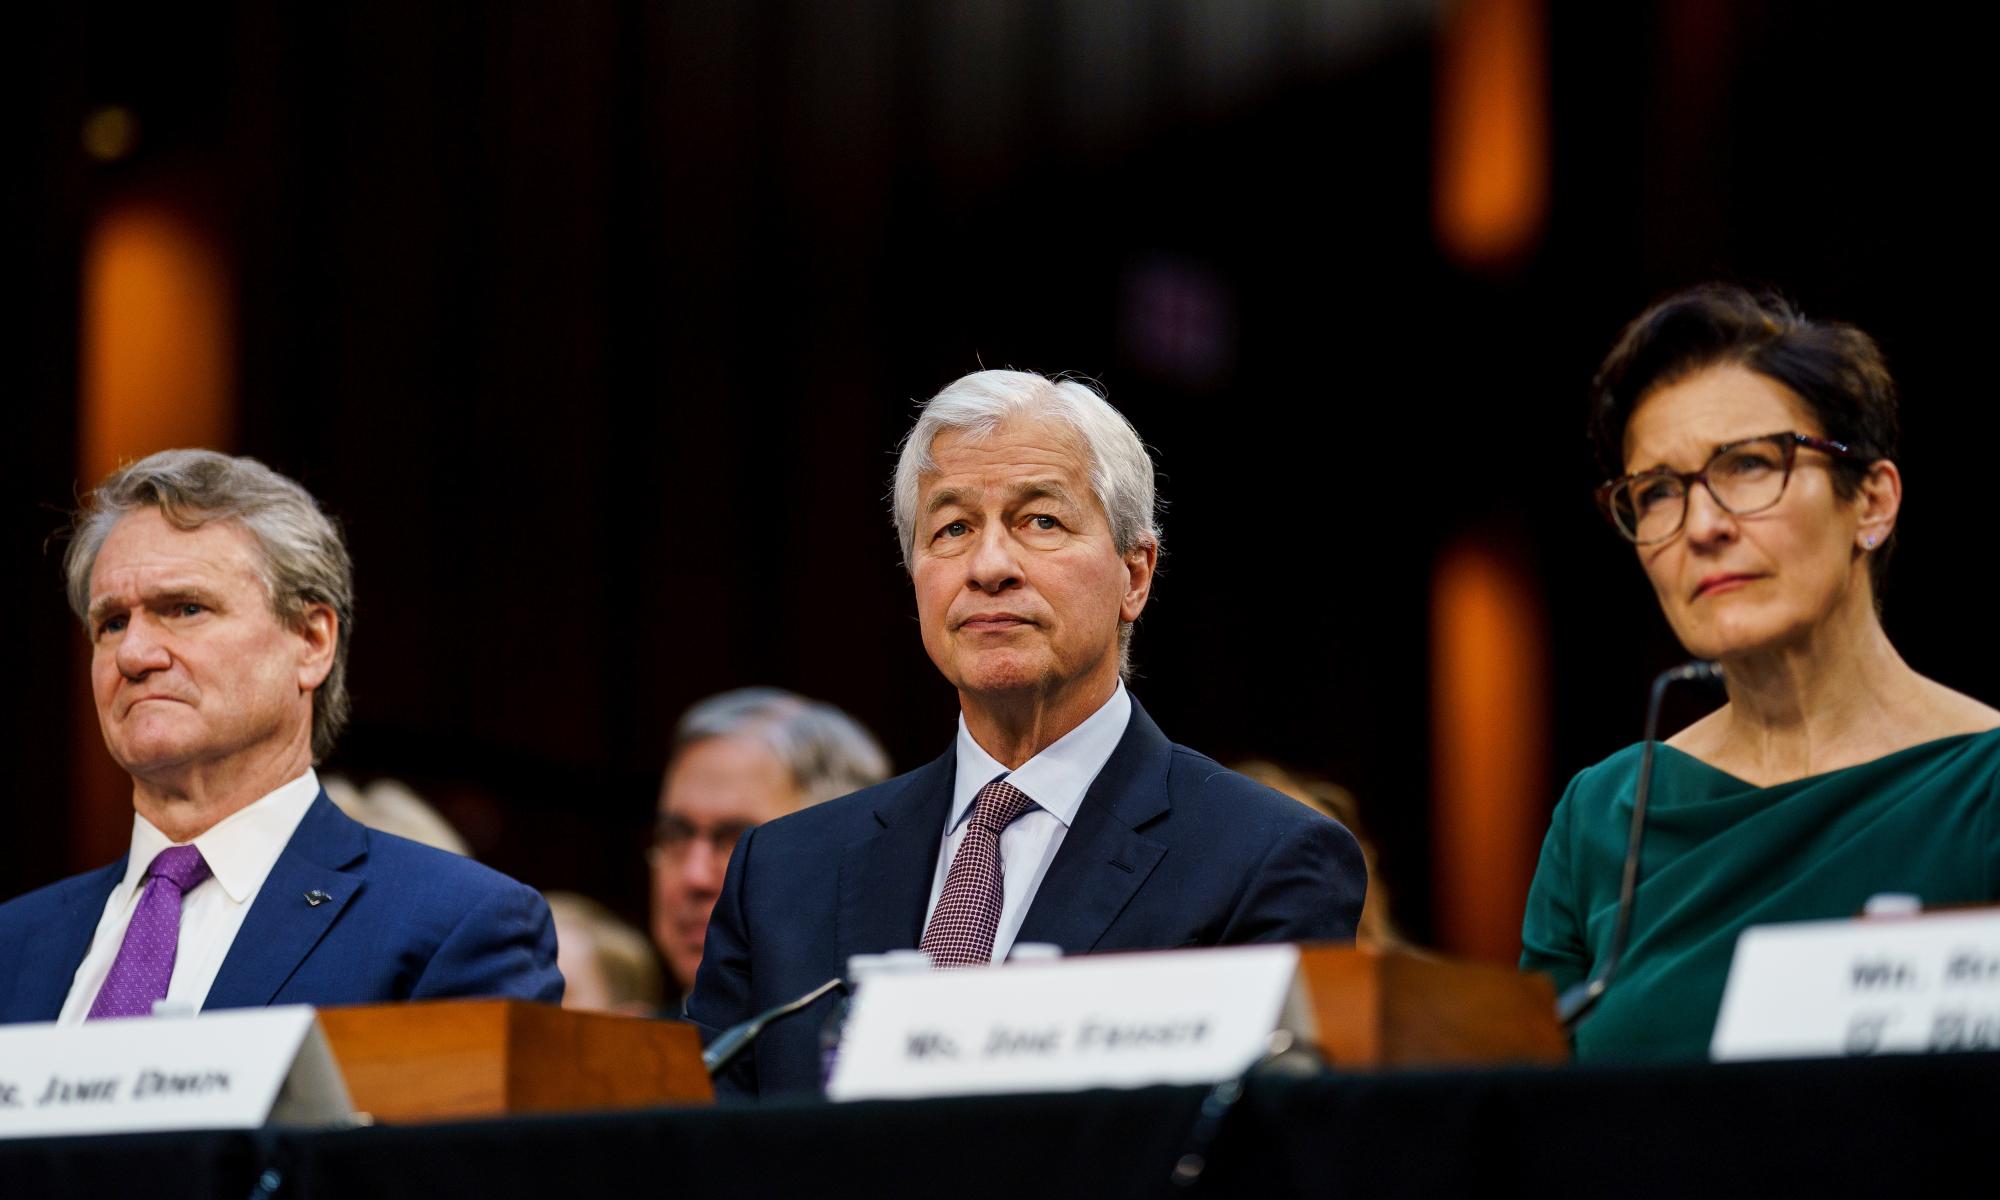 jamie dimon thinks trump was ‘kind of right’ about a lot of things. what?